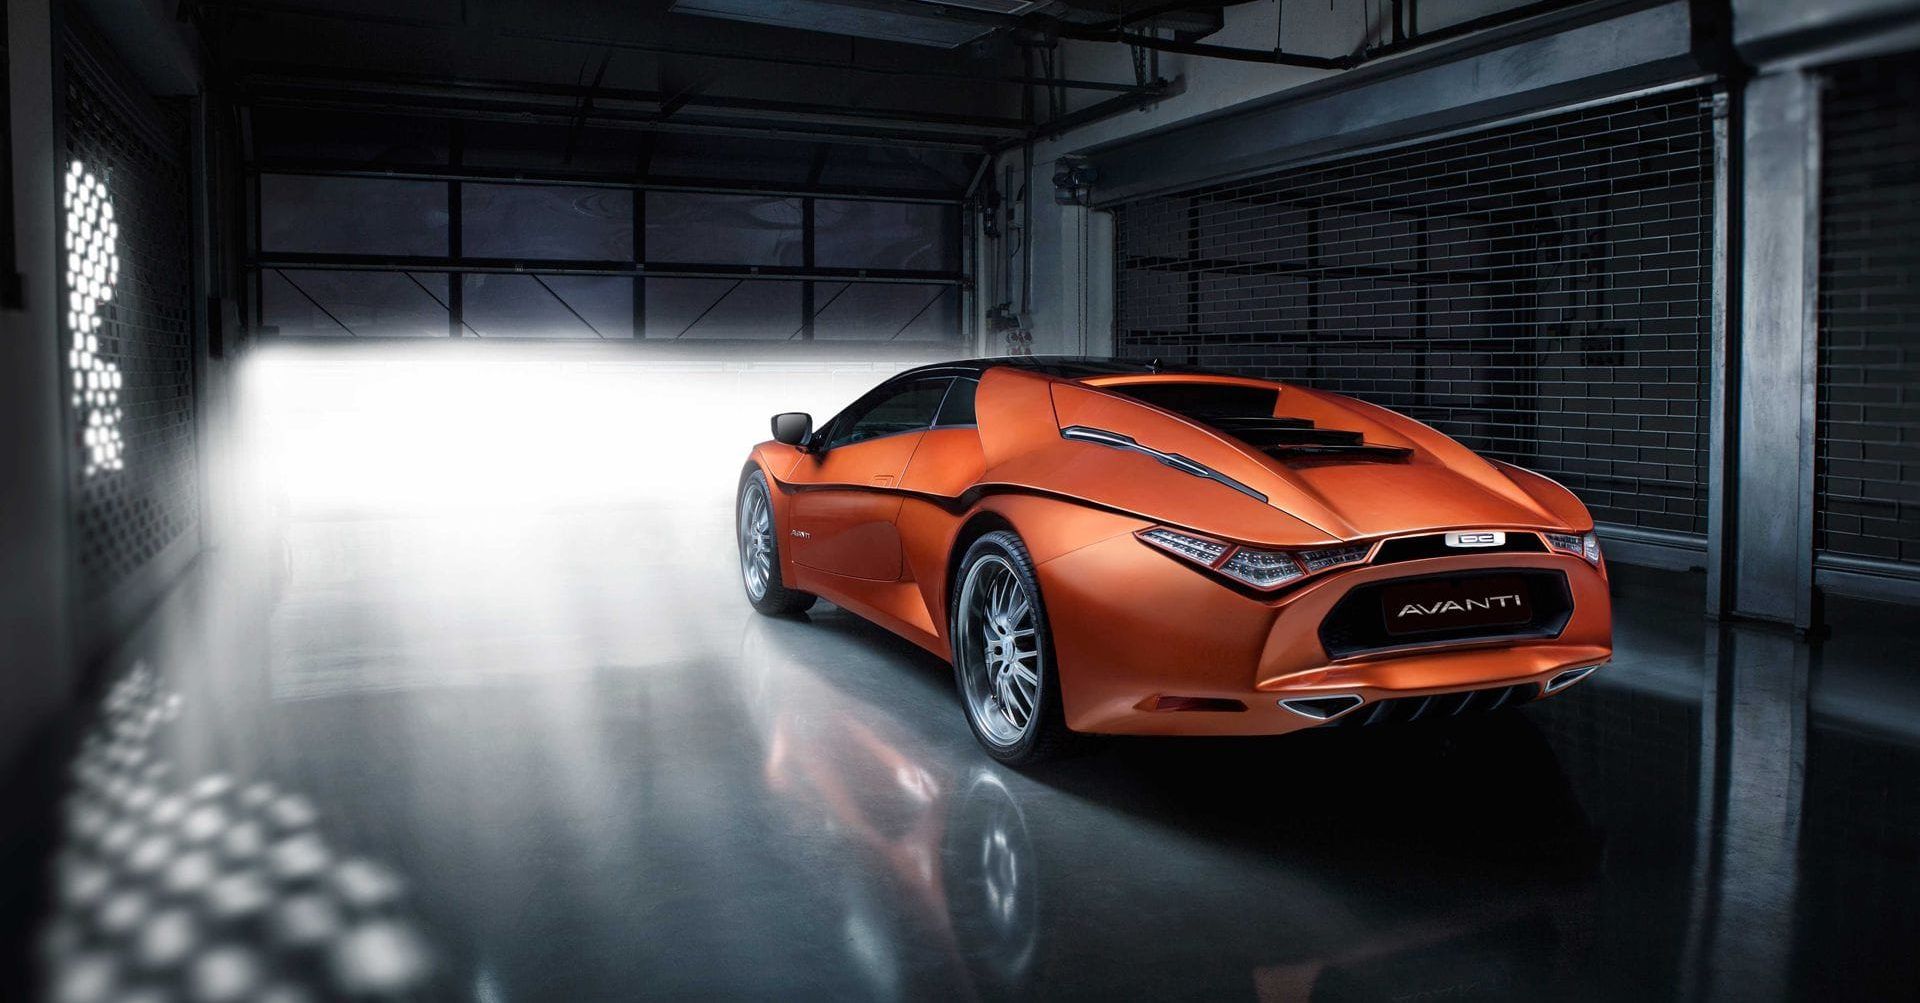 Turn your car into a world-class custom at these 5 auto modification studios